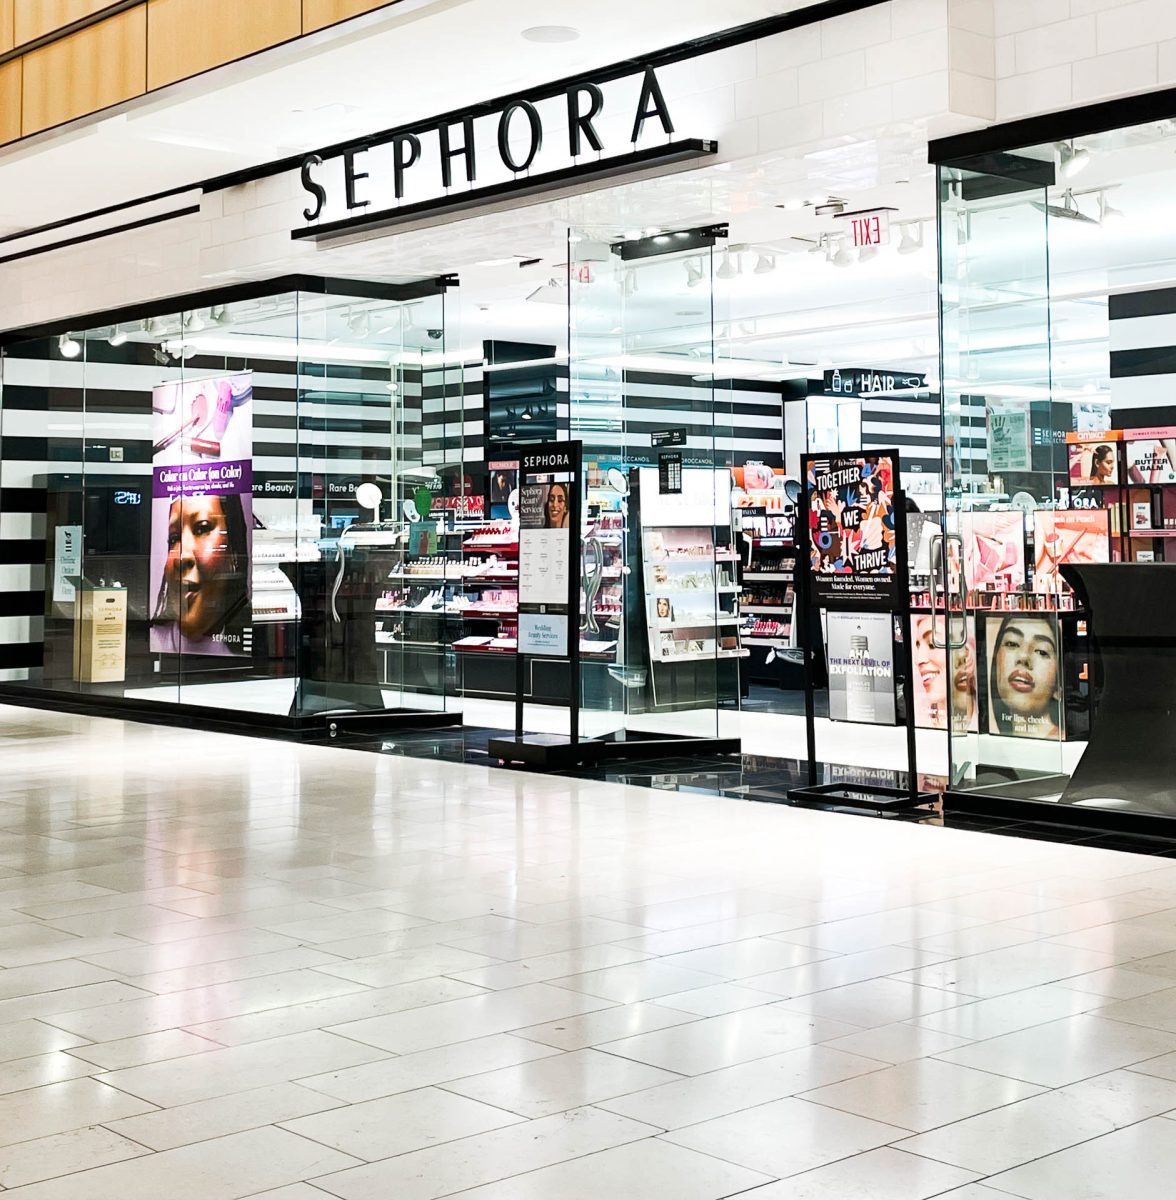 According+to+Sephora%2C+the+stores+%E2%80%9Ctop+priority+is+to+create+a+welcoming+and+inclusive+shopping+experience+for+all.+We+are+extremely+disappointed+by+the+behavior+of+these+shoppers+at+our+Prudential+Center+location%2C+and+as+such%2C+they+were+asked+to+leave+our+premises.+Under+no+circumstance+is+this+type+of+behavior+tolerated+at+Sephora.